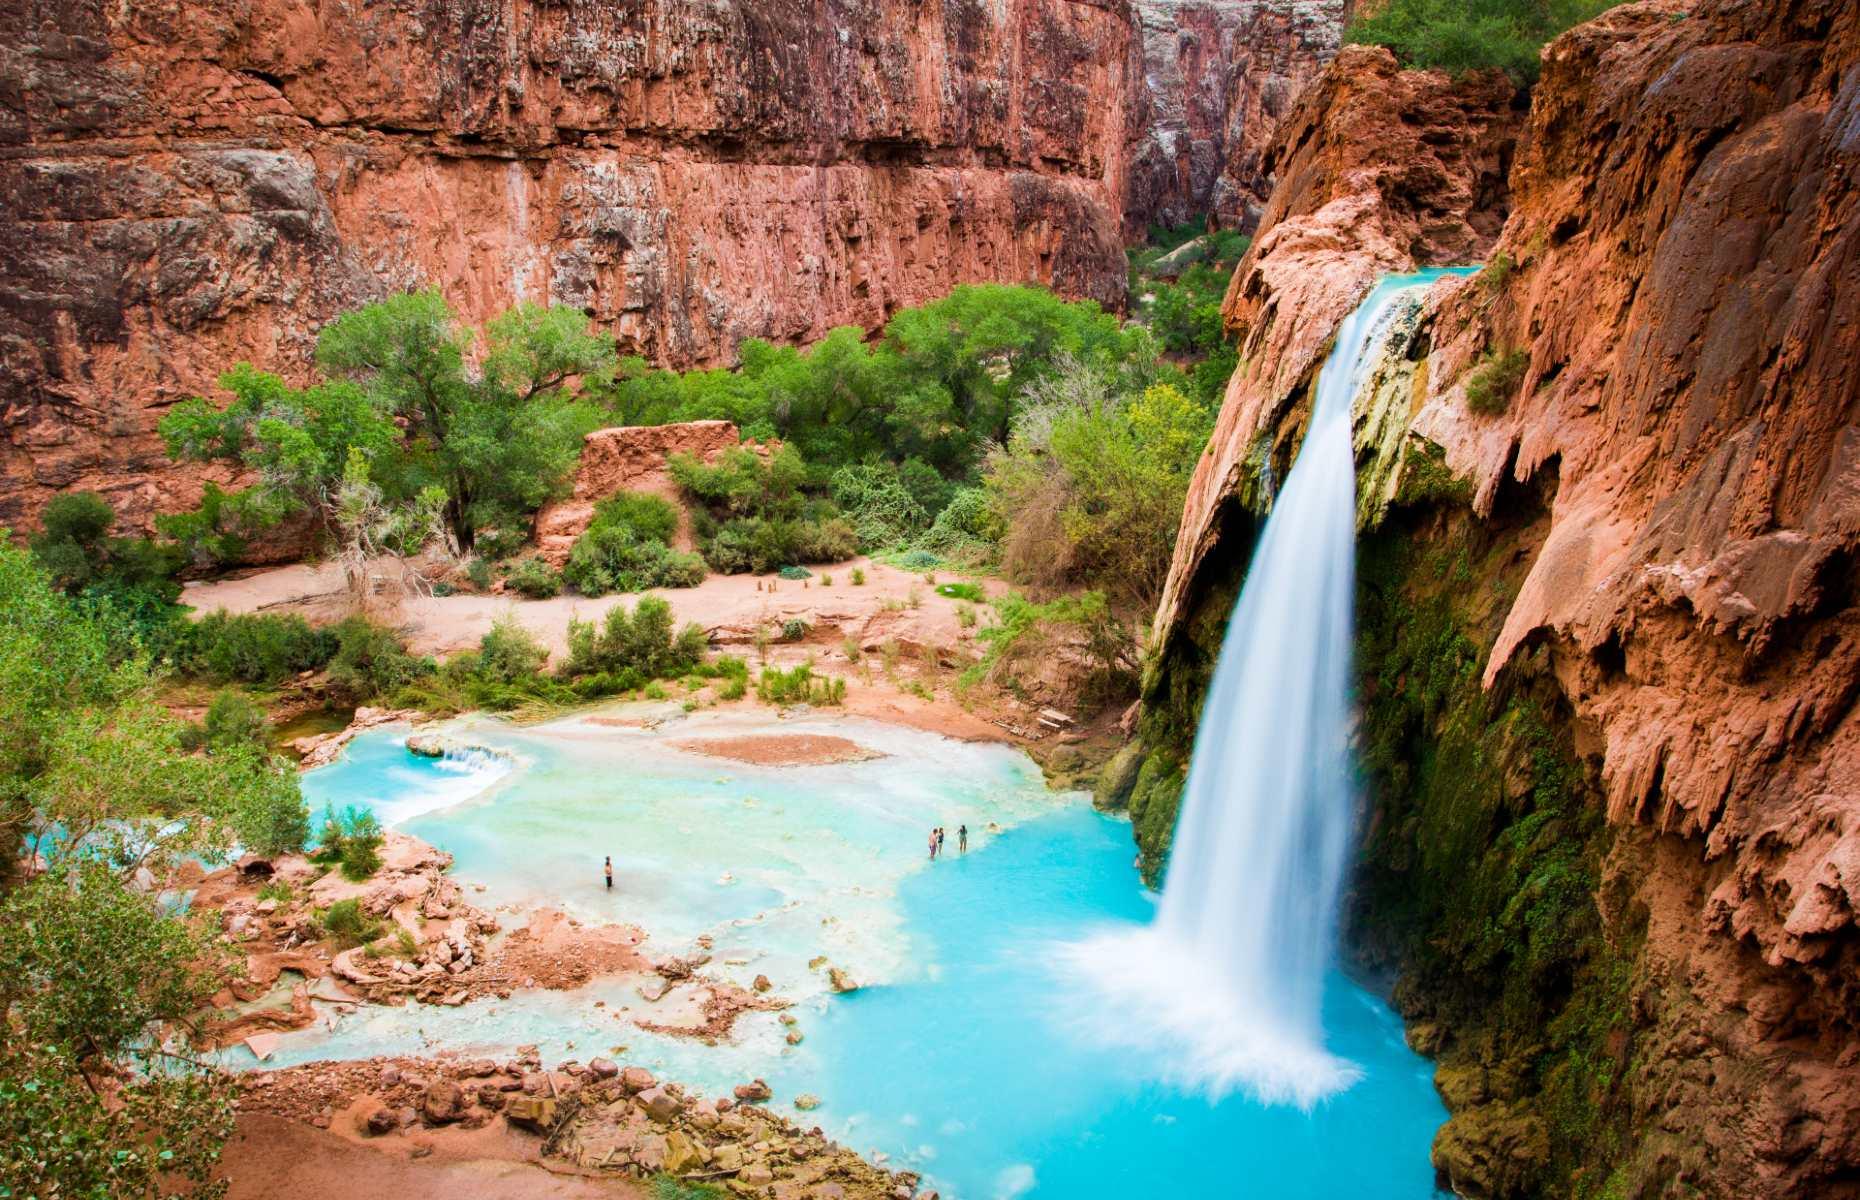 <p>With their vibrant cyan waters, it’s hard to believe Havasu Falls are real. And while they’re one of Arizona’s best-loved natural wonders, seeing them with your own eyes might be a little harder: they’re located on Havasupai Indian Reservation, so visitors need to buy a permit from the Havasupai Tribe to access the area (tourism is currently suspended at the site <a href="https://www.nps.gov/grca/planyourvisit/havasupai.htm">to restrict the spread of COVID-19</a>). If you manage to get a permit, you’ll need to prepare for two to three days of challenging hikes across steep terrain and in hot conditions, before you can take a dip in the majestic falls.</p>